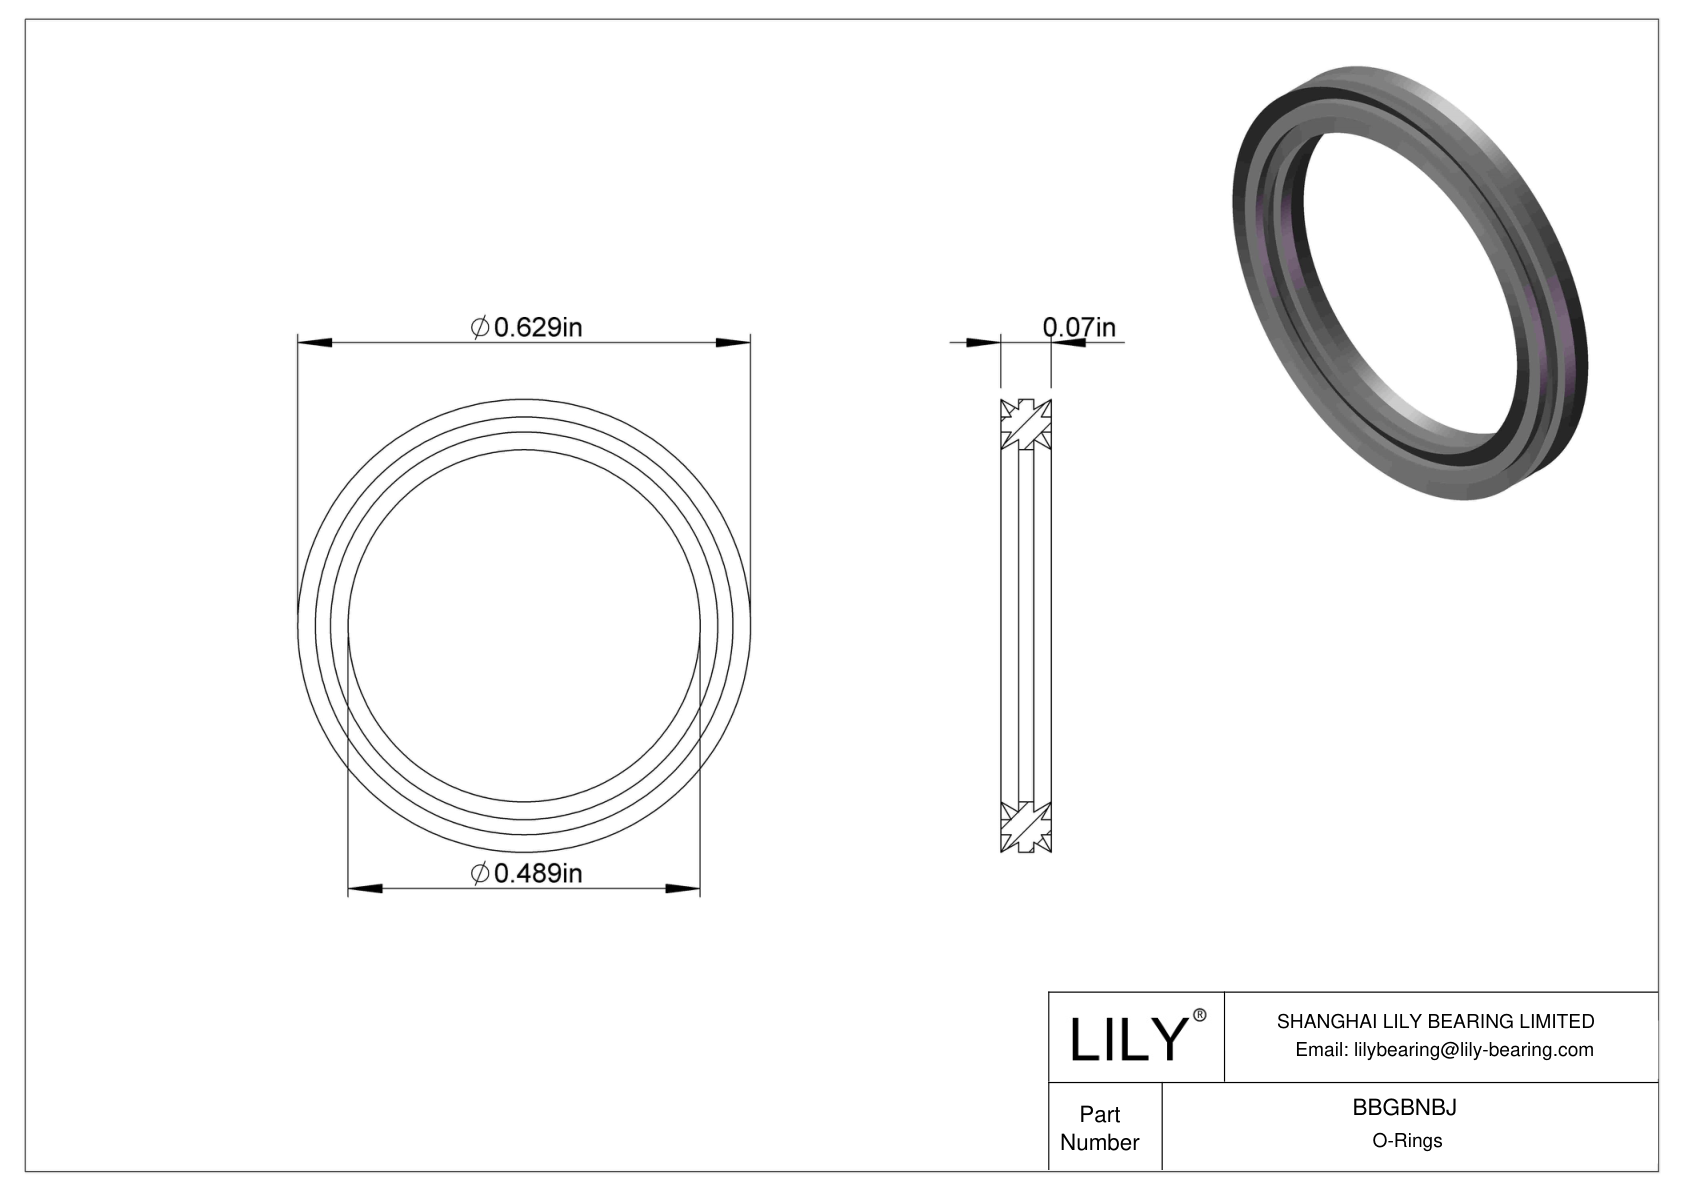 BBGBNBJ Oil Resistant O-Rings Double X cad drawing